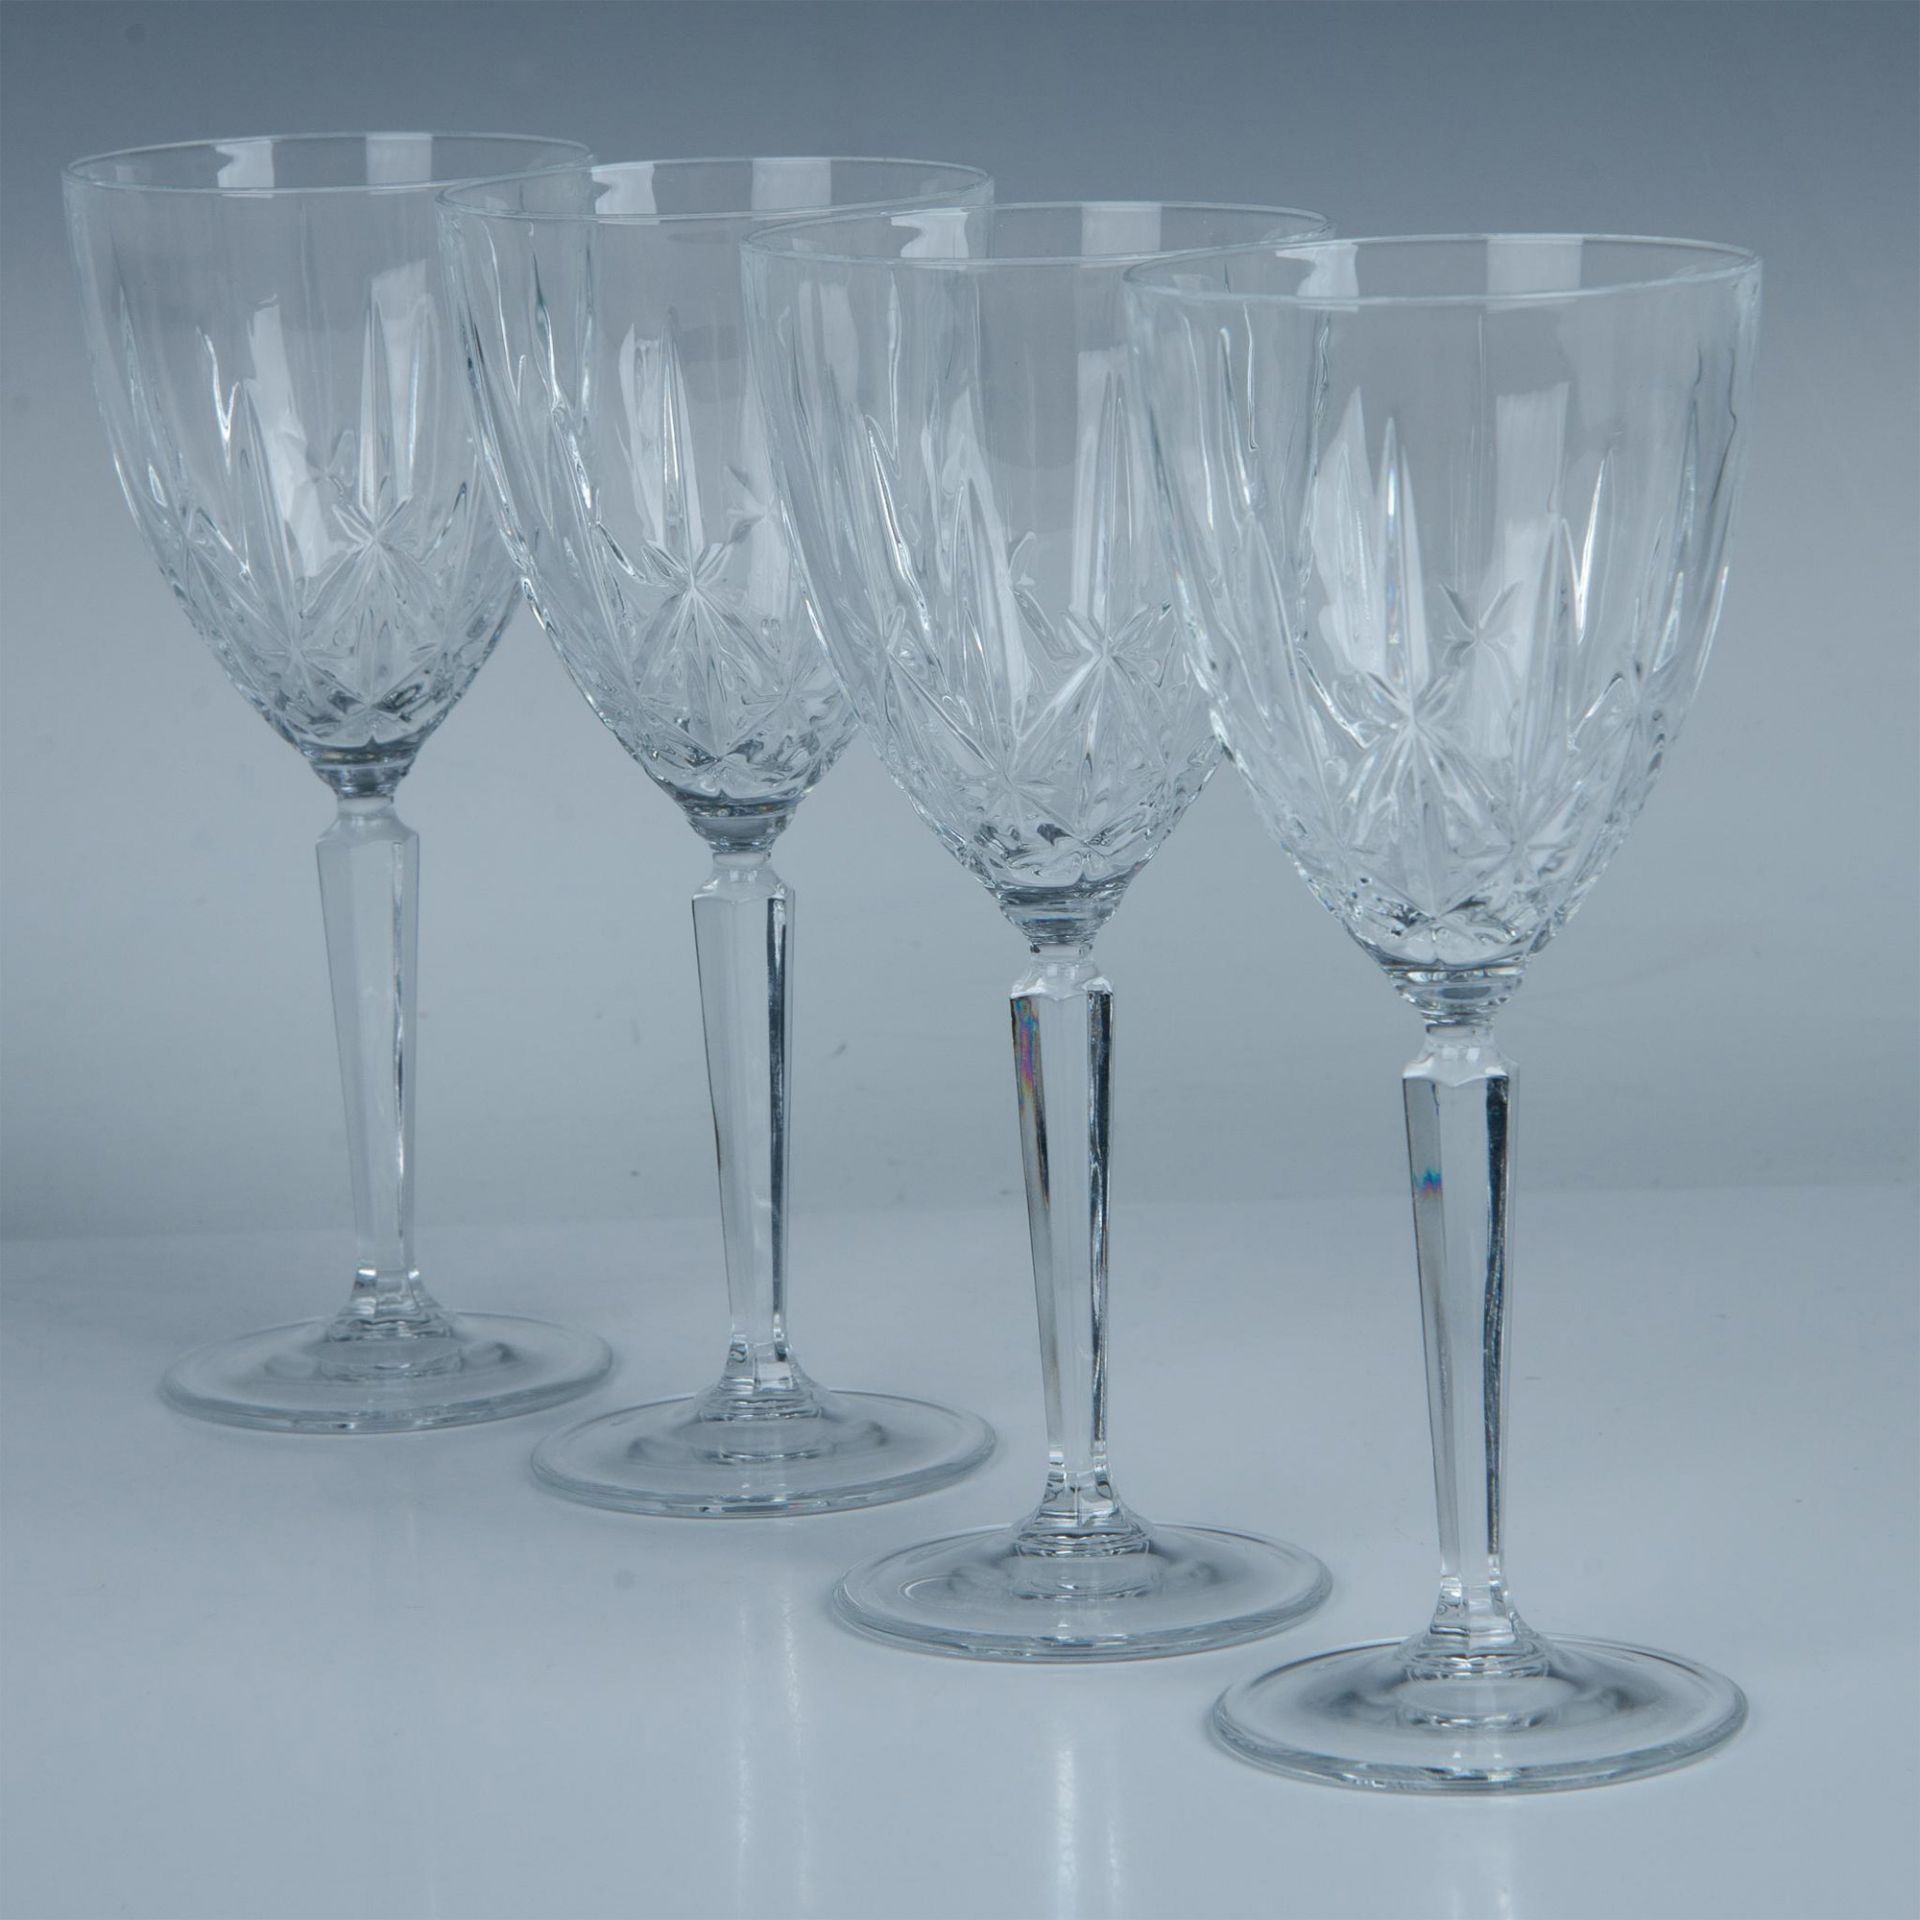 4pc Marquis by Waterford Set of Oversized Goblets, Sparkle - Image 4 of 7